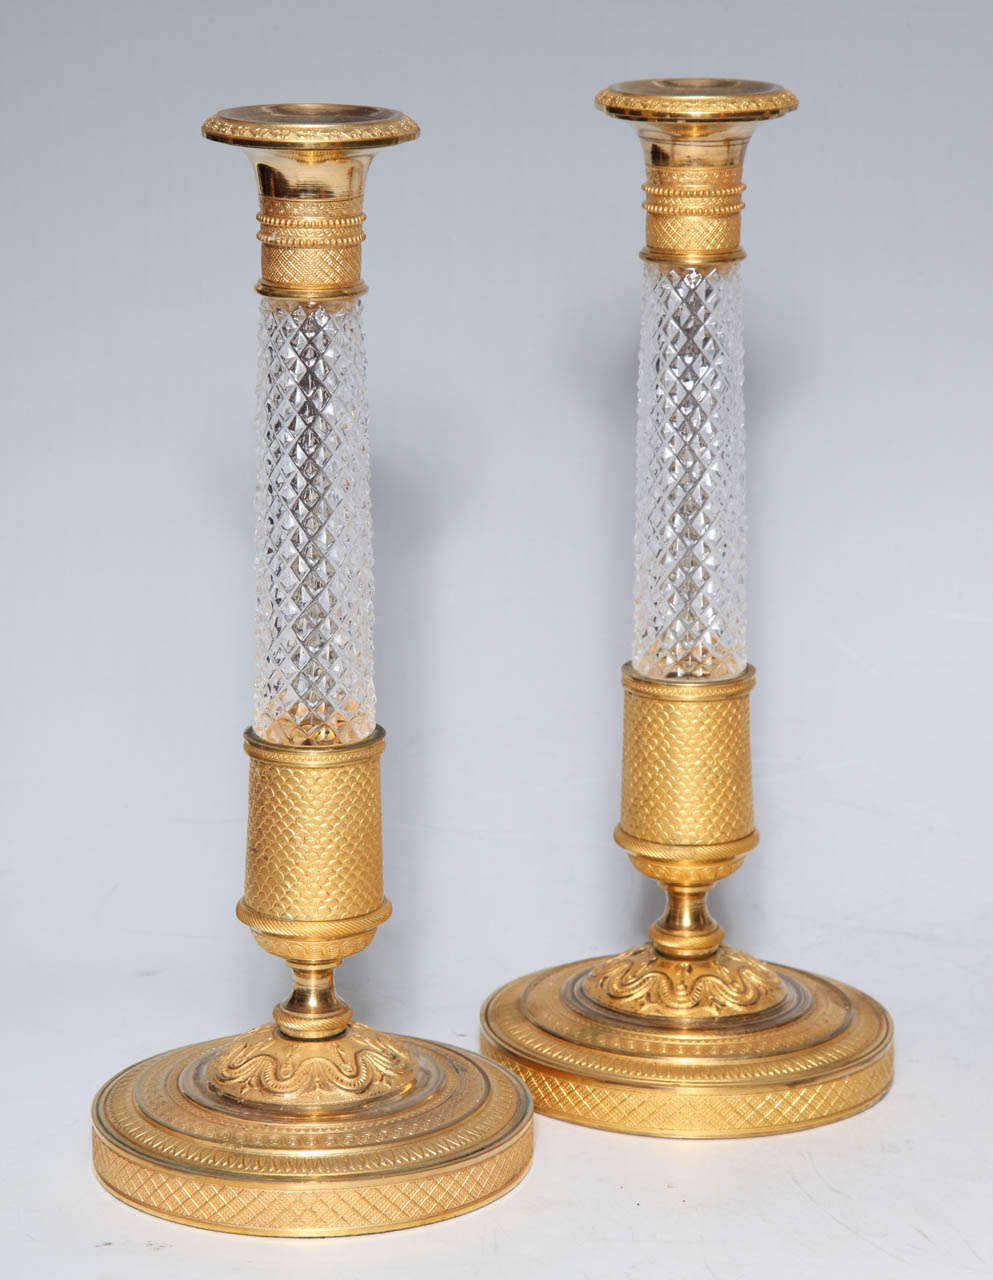 19th Century French Cut Crystal and Dore Bronze-Mounted Candlestick/Candelabra Garniture Set